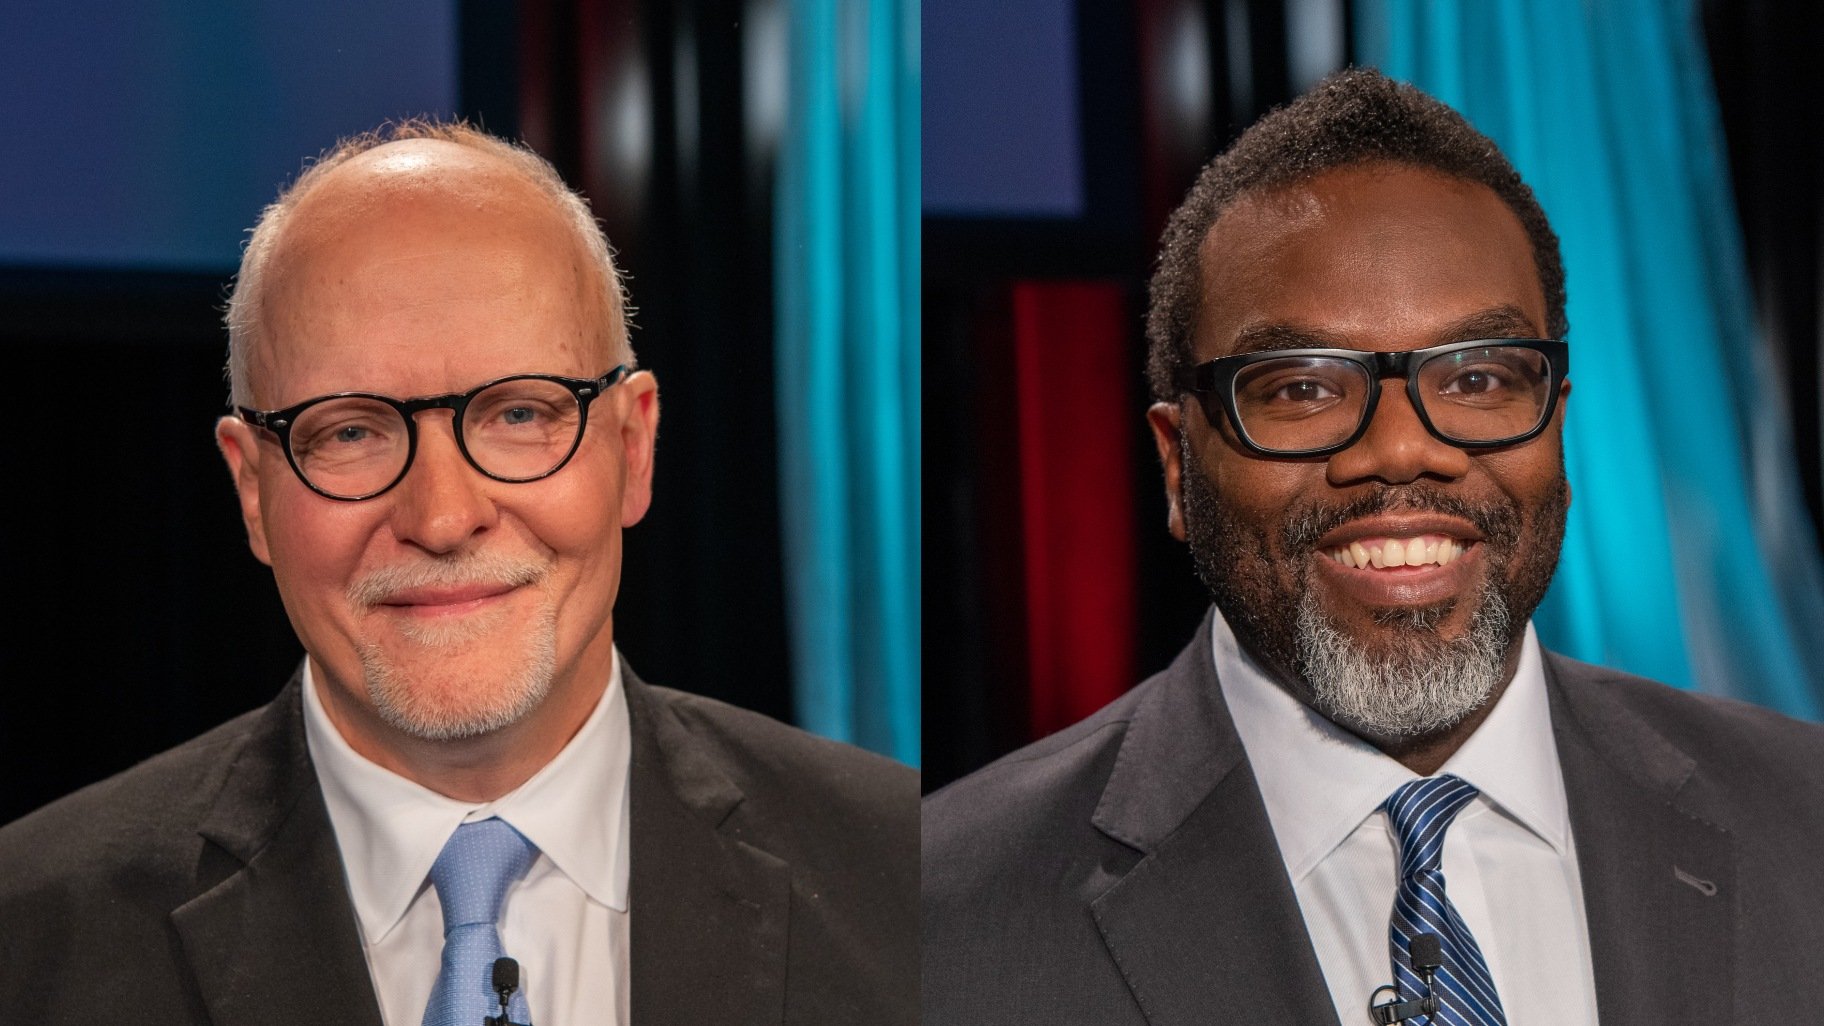 Vallas and Johnson Headed to Chicago Mayoral Runoff, Lightfoot Denied  Second Term, Chicago News